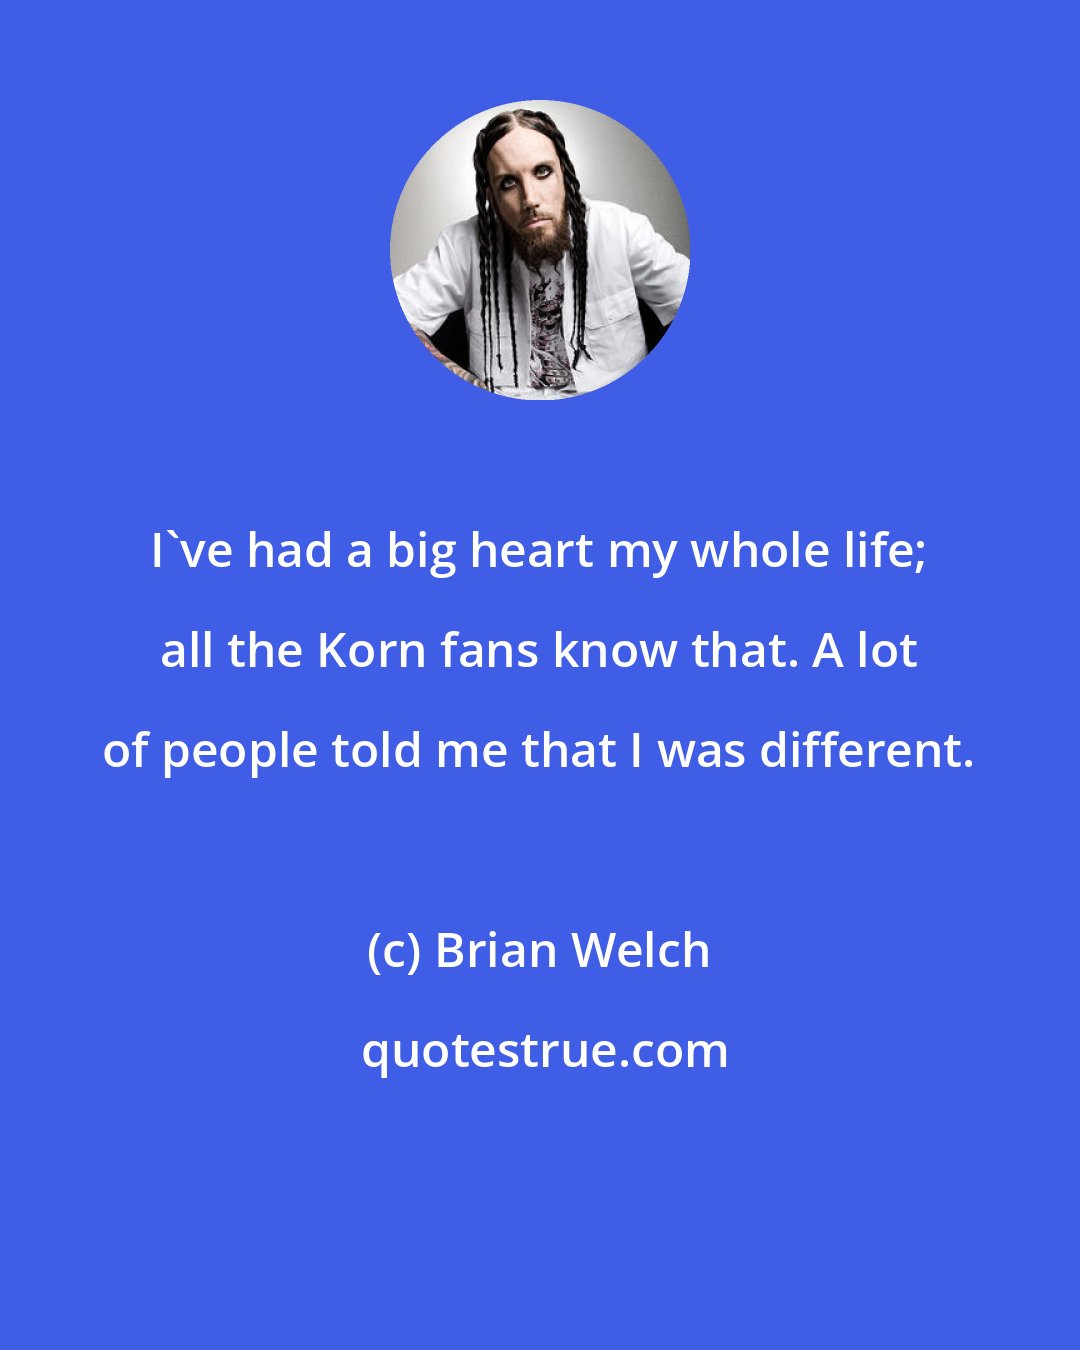 Brian Welch: I've had a big heart my whole life; all the Korn fans know that. A lot of people told me that I was different.